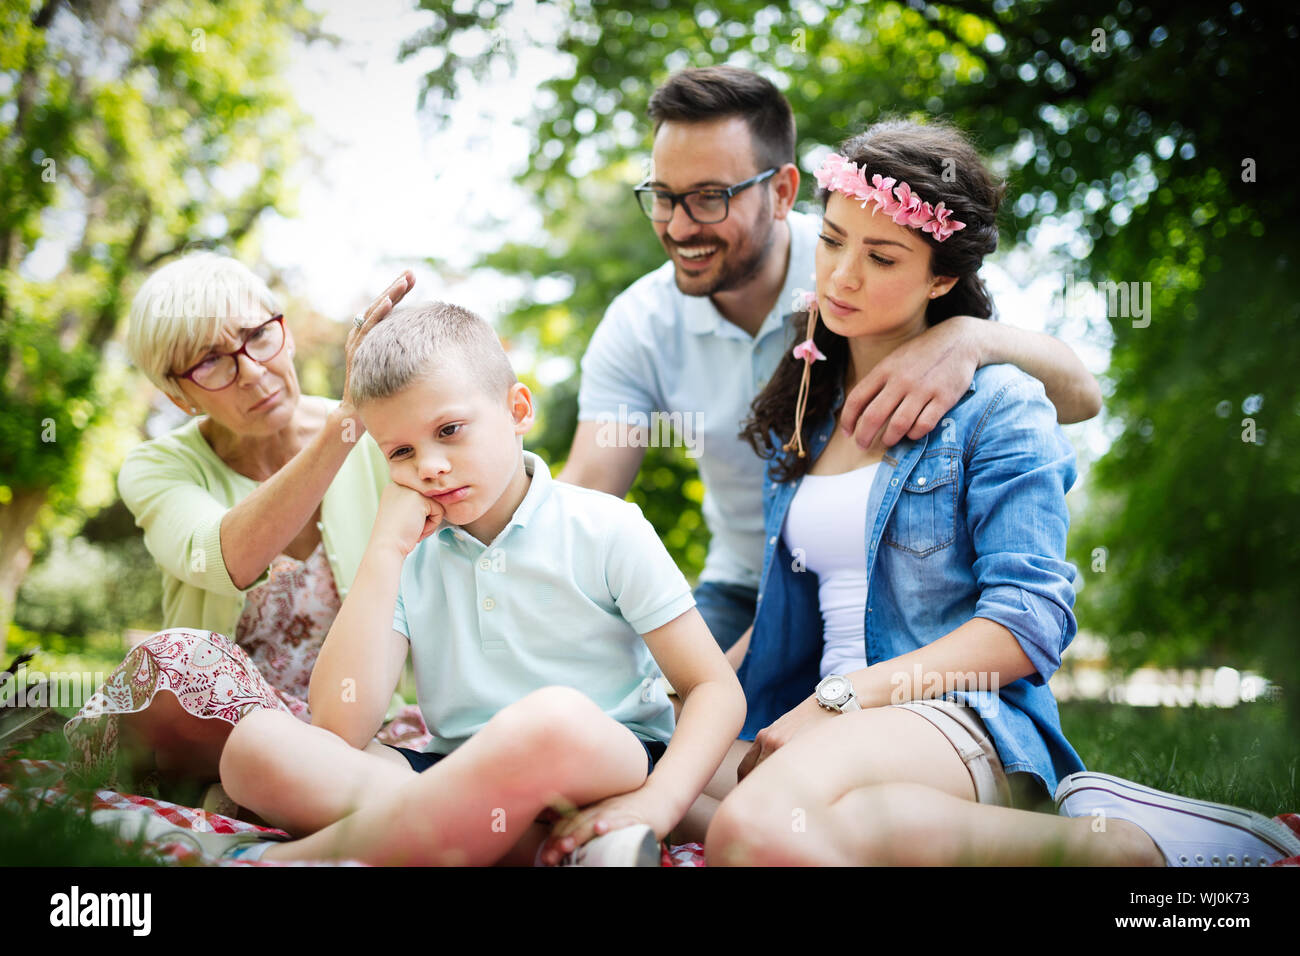 Family consoling little stubborn child and managing emotions Stock Photo